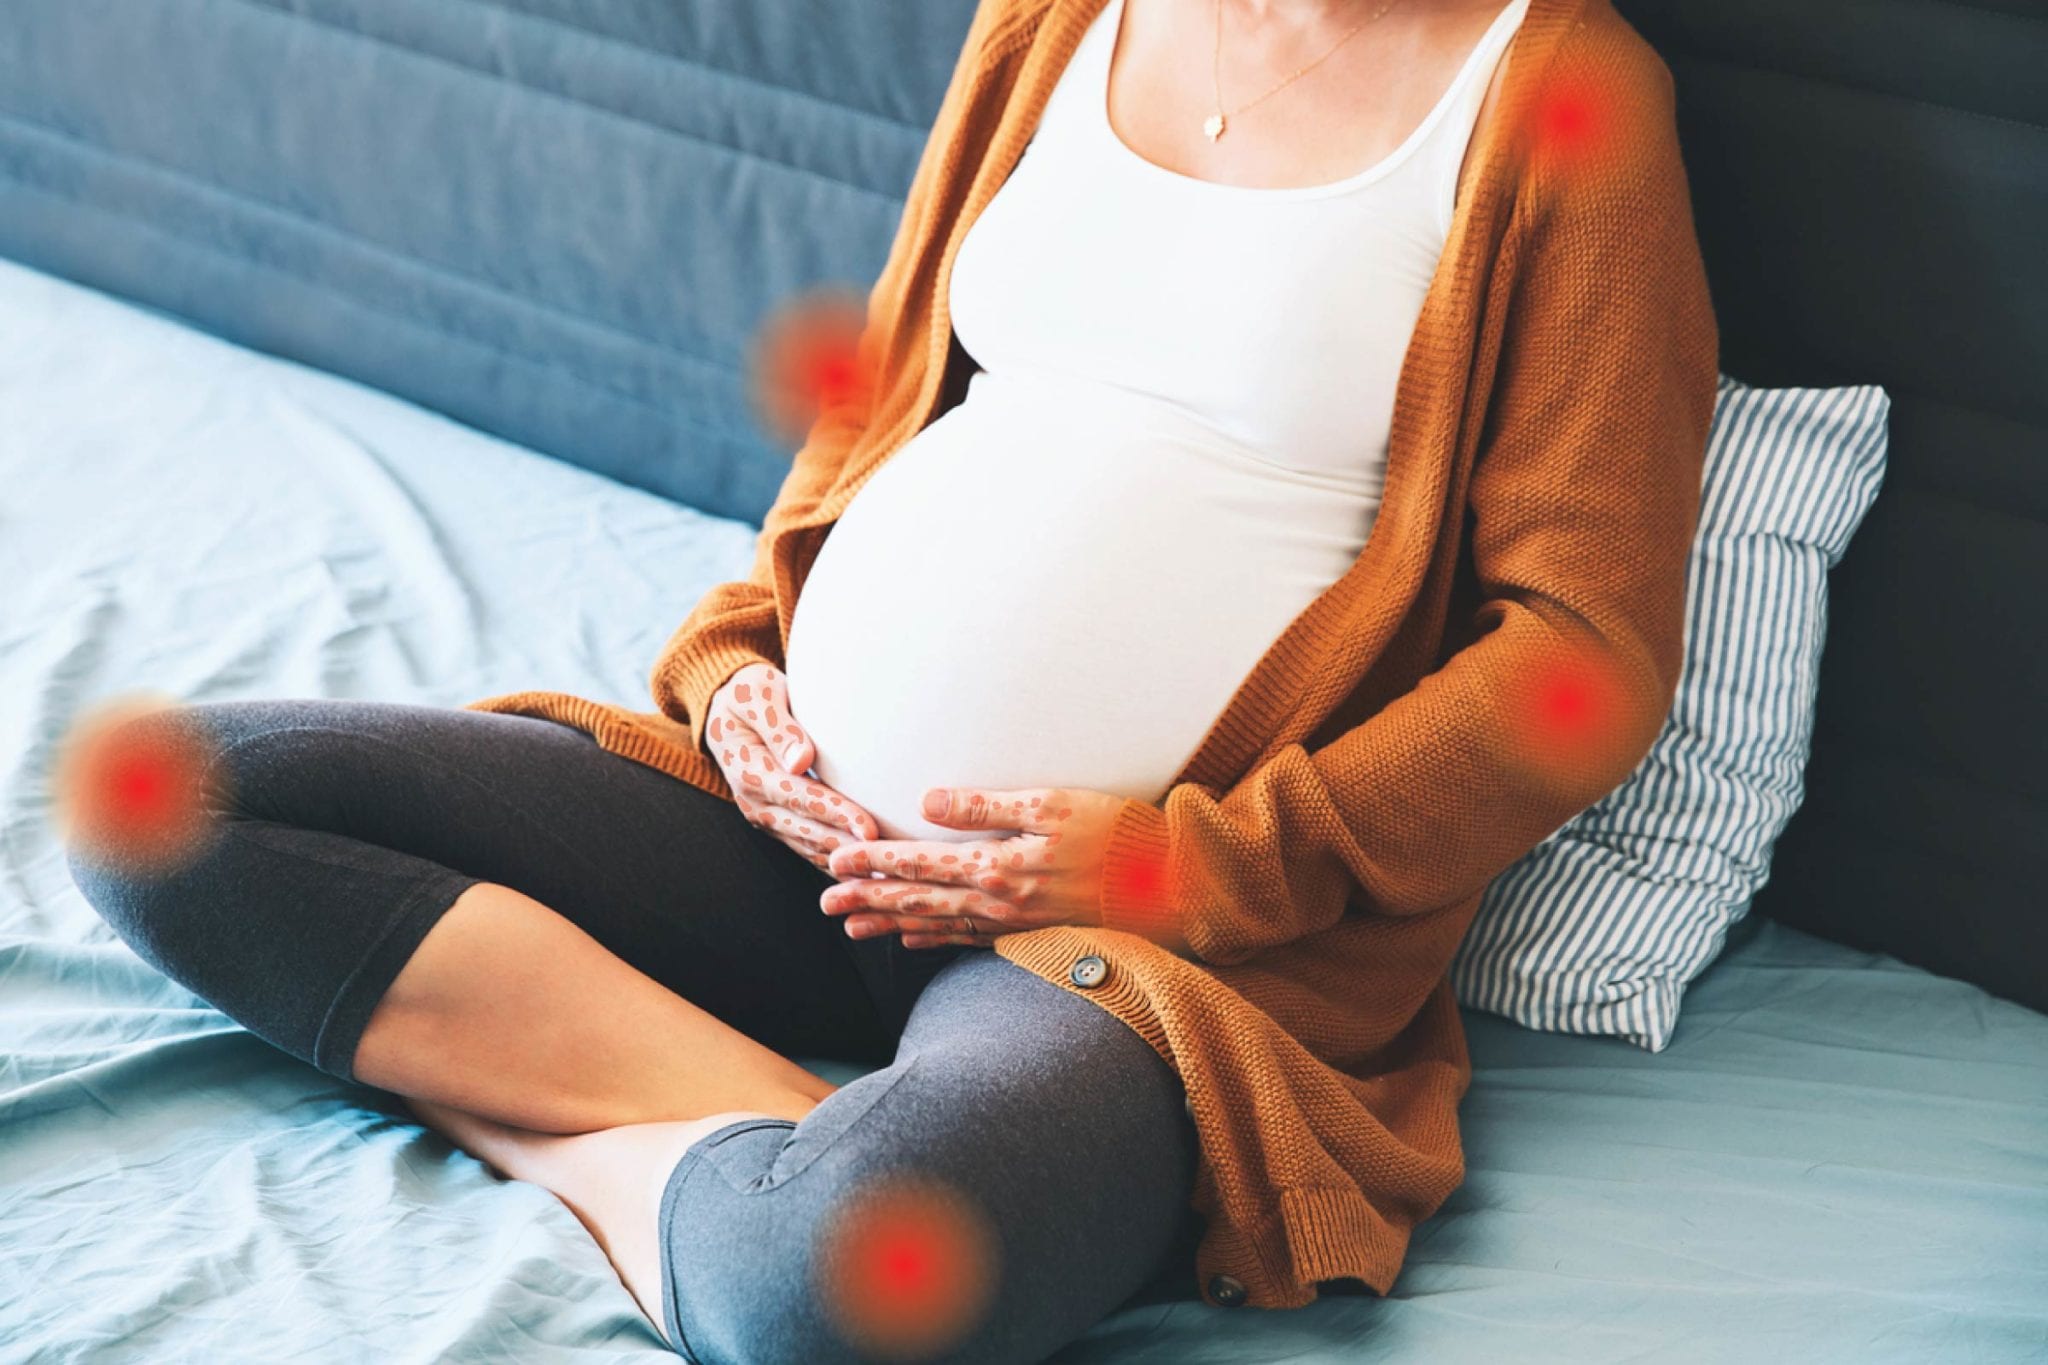 psoriasis remission during pregnancy